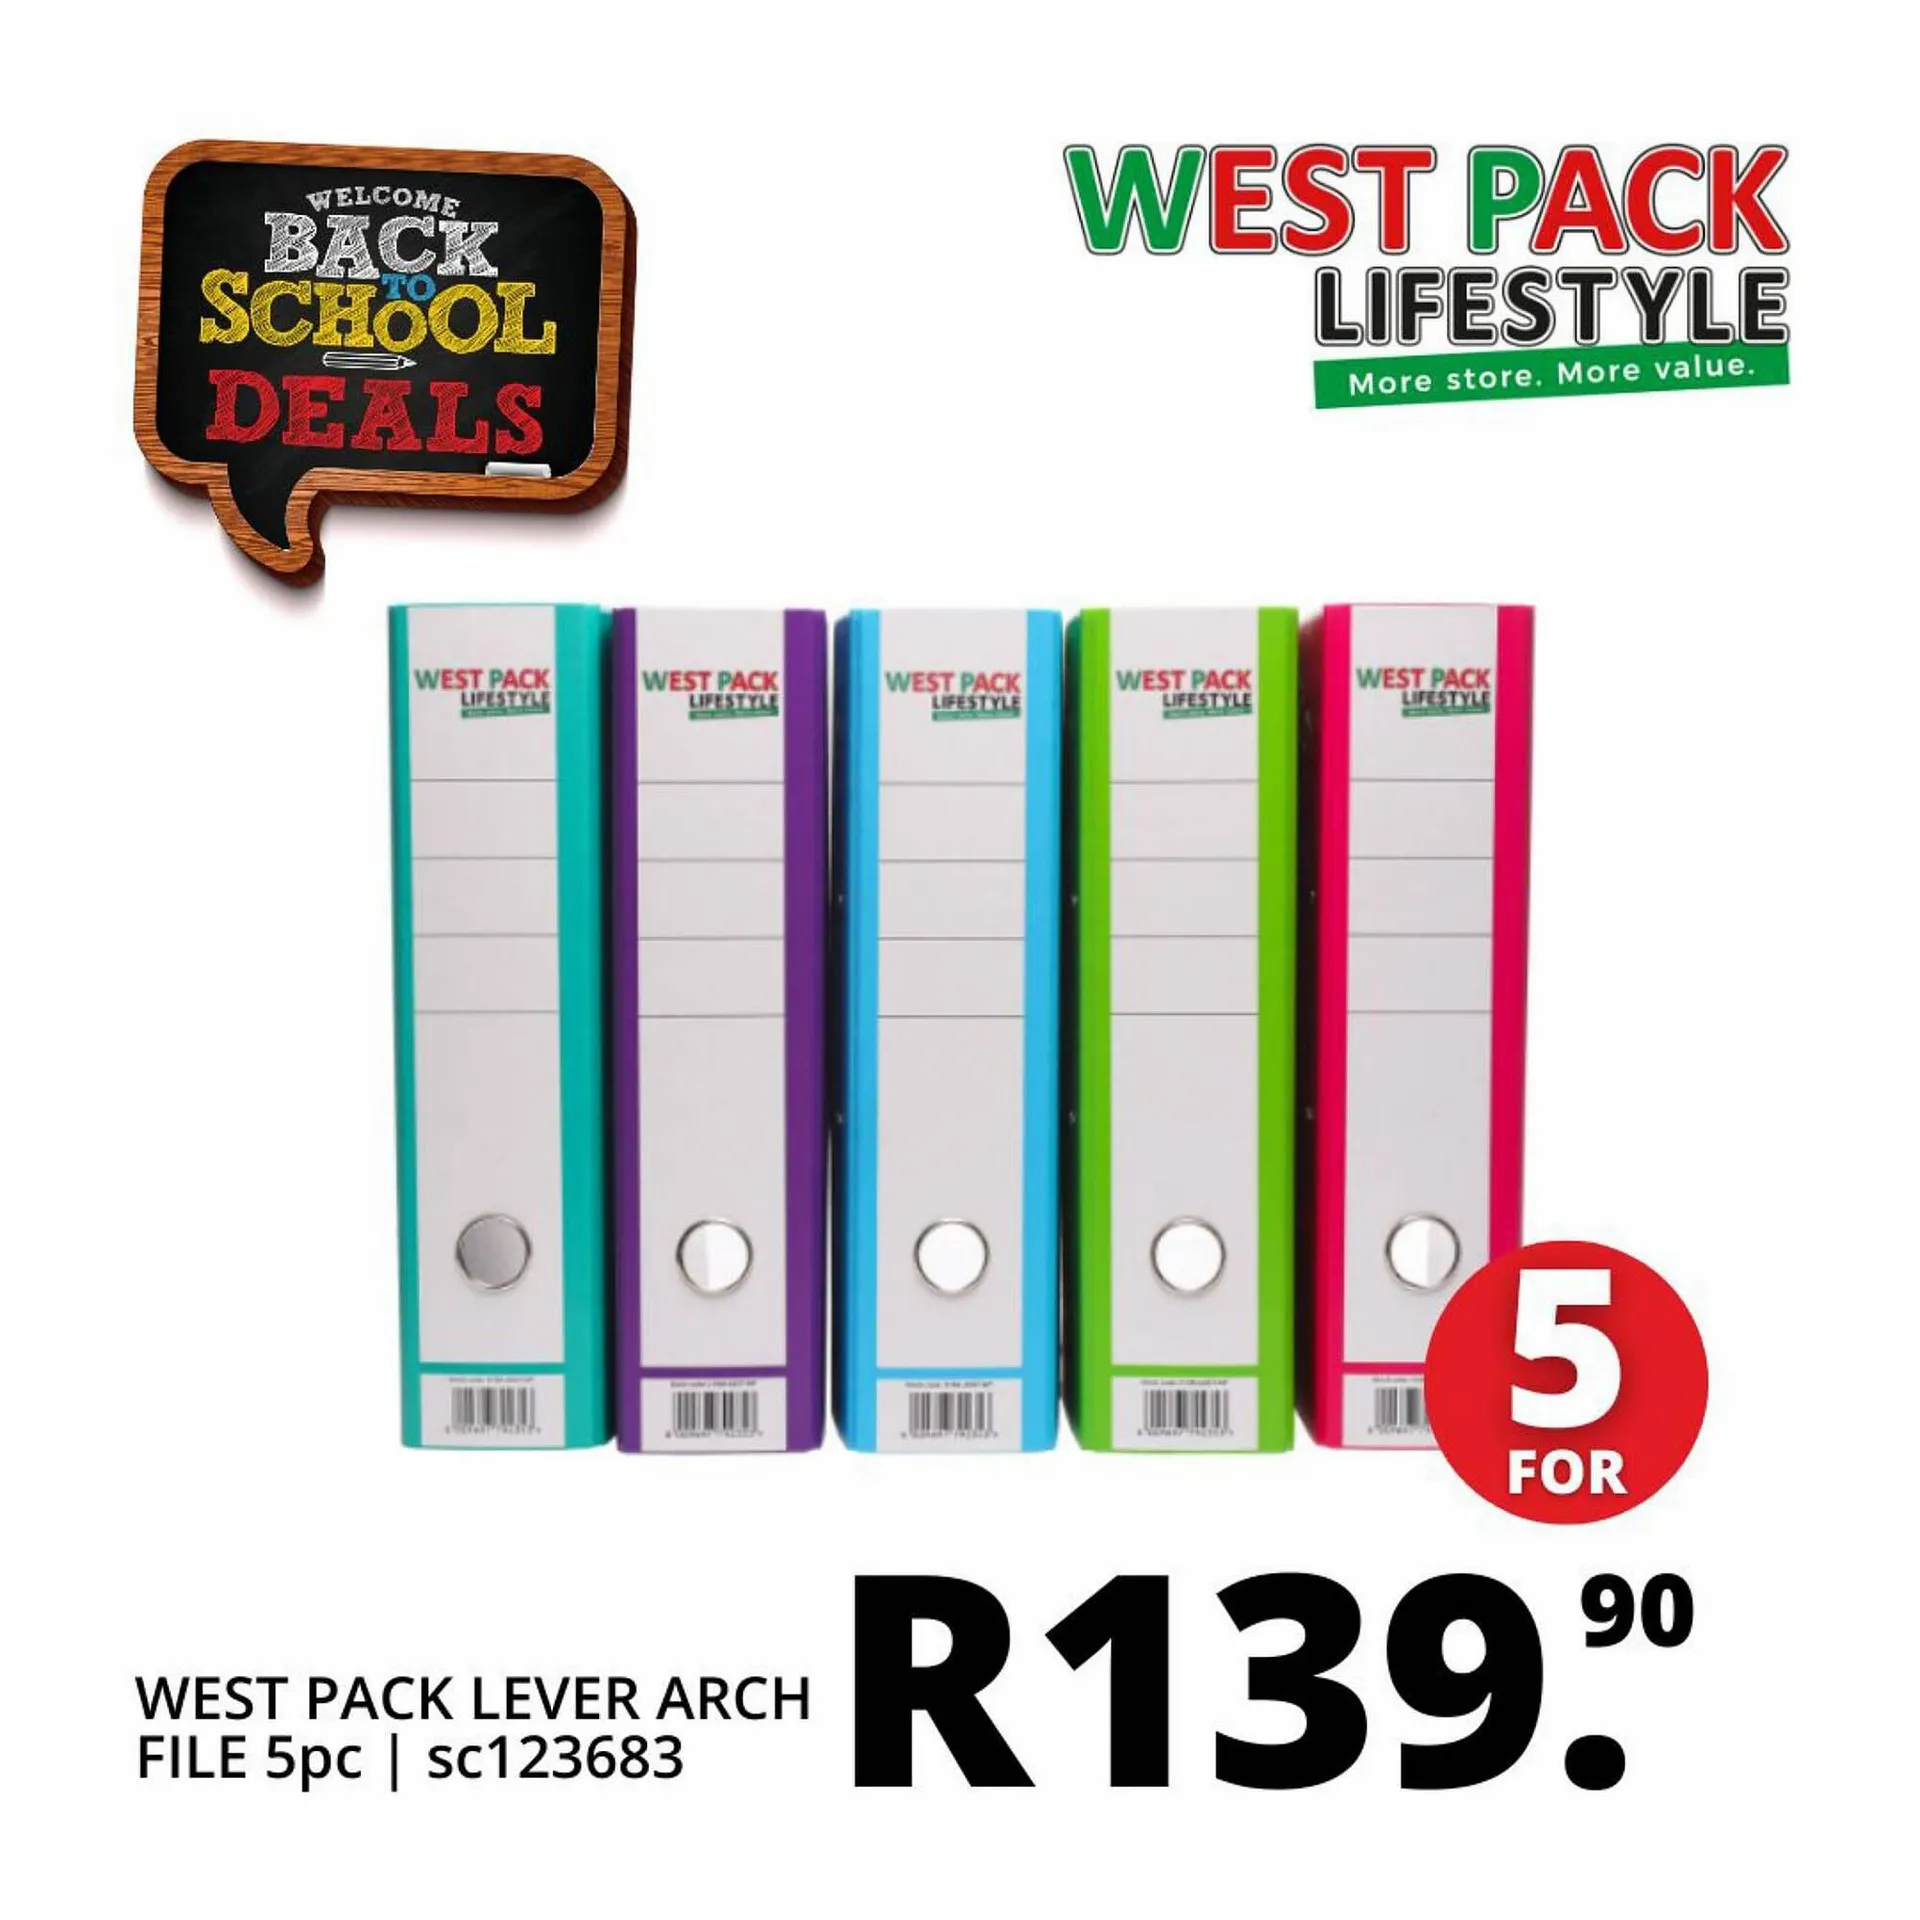 West Pack Lifestyle catalogue - 1